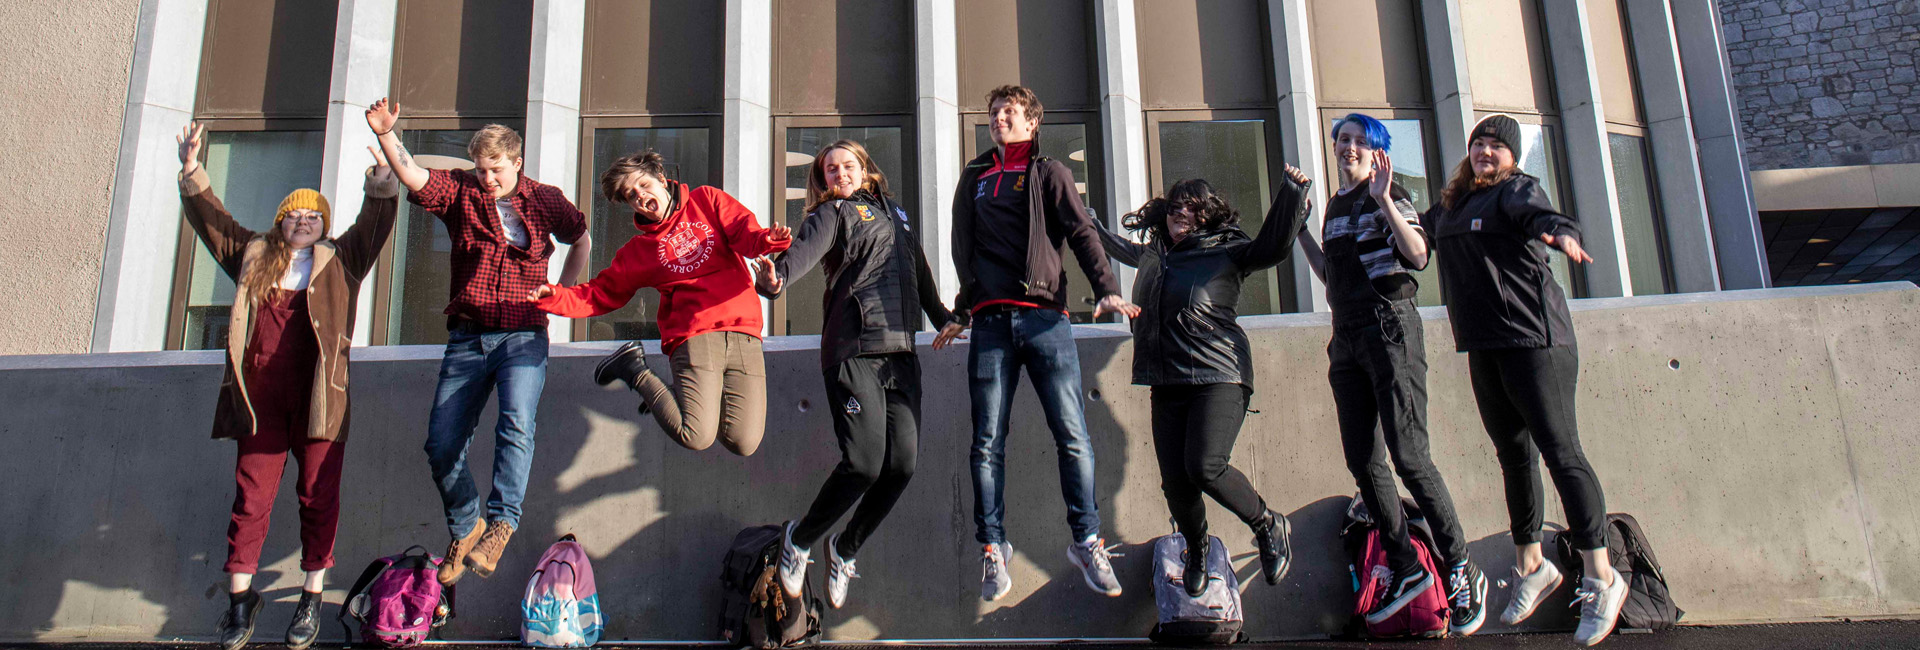 a row of college students jumping